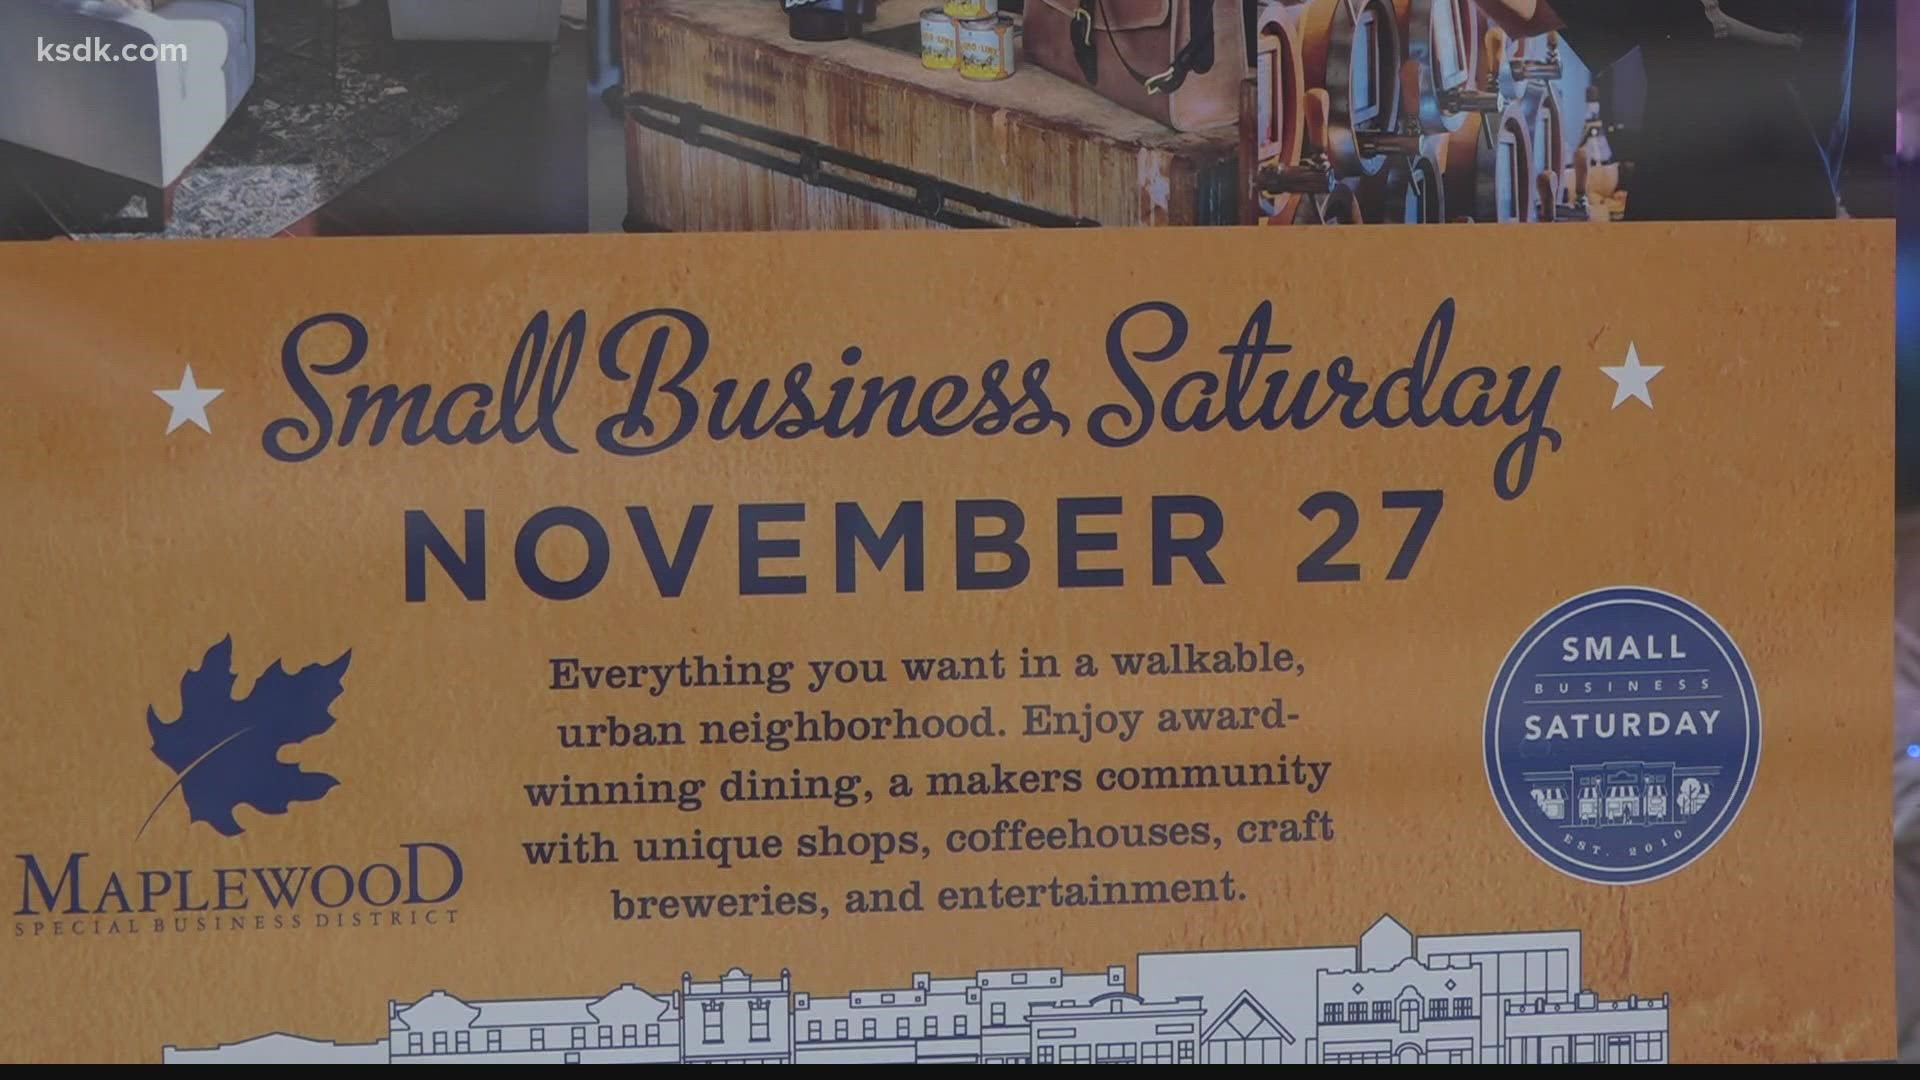 White House officials say last year, Small Business Saturday hit a record high in sales, with an estimated $19.8-billion reported in spending.